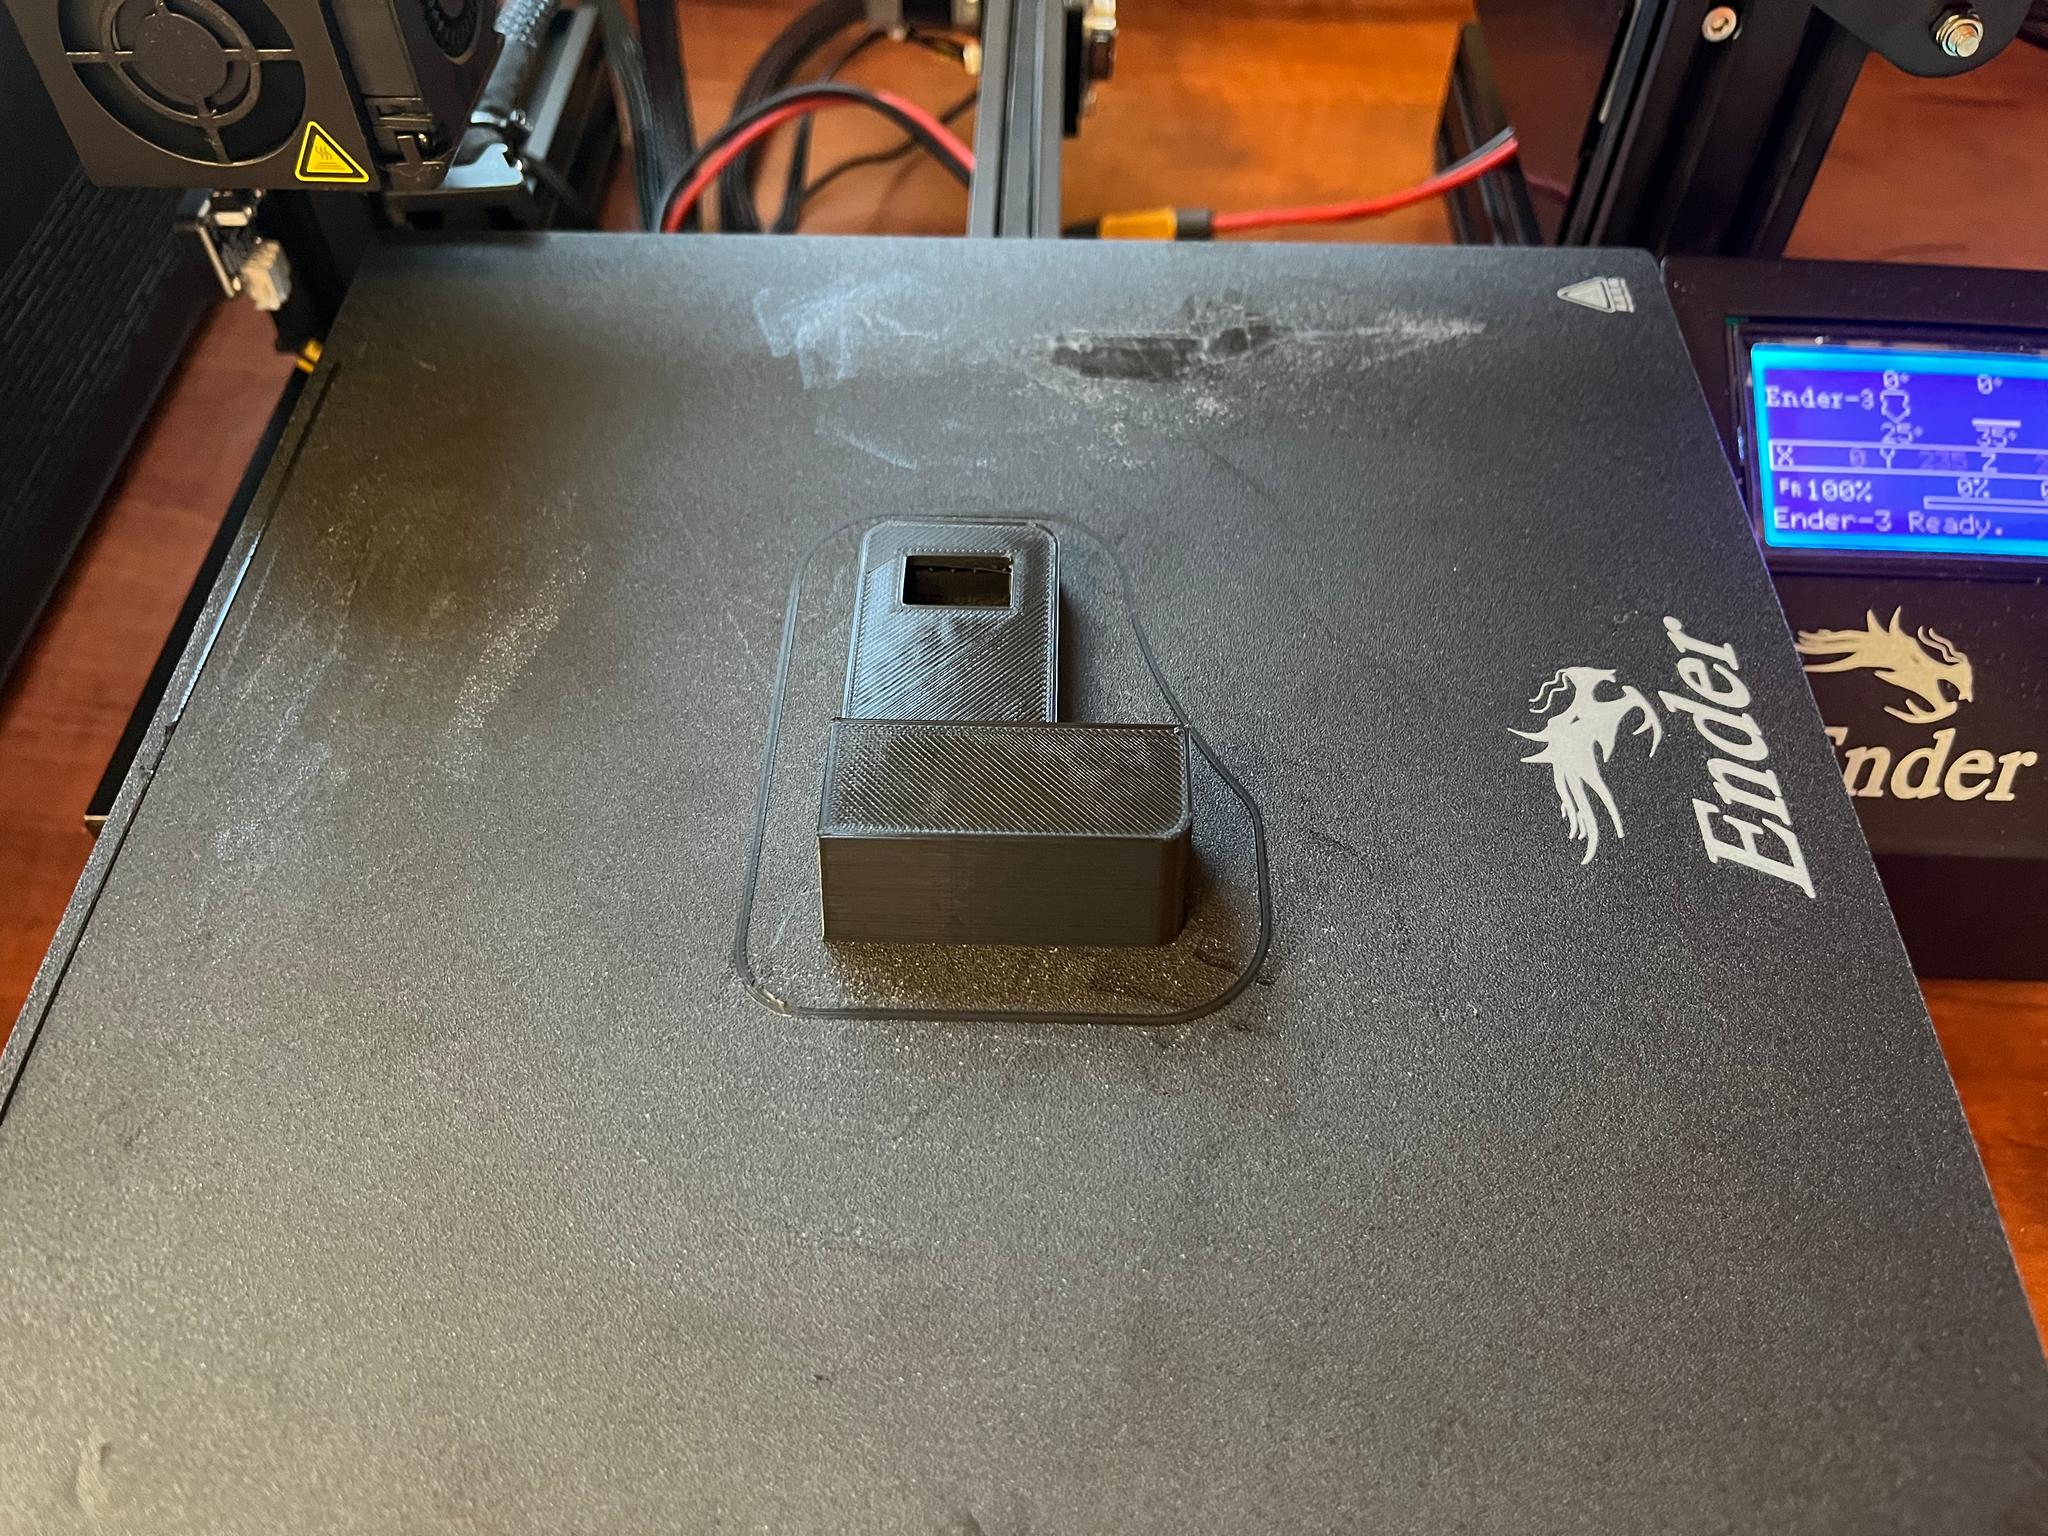 Finished print for no dock laptop insert.